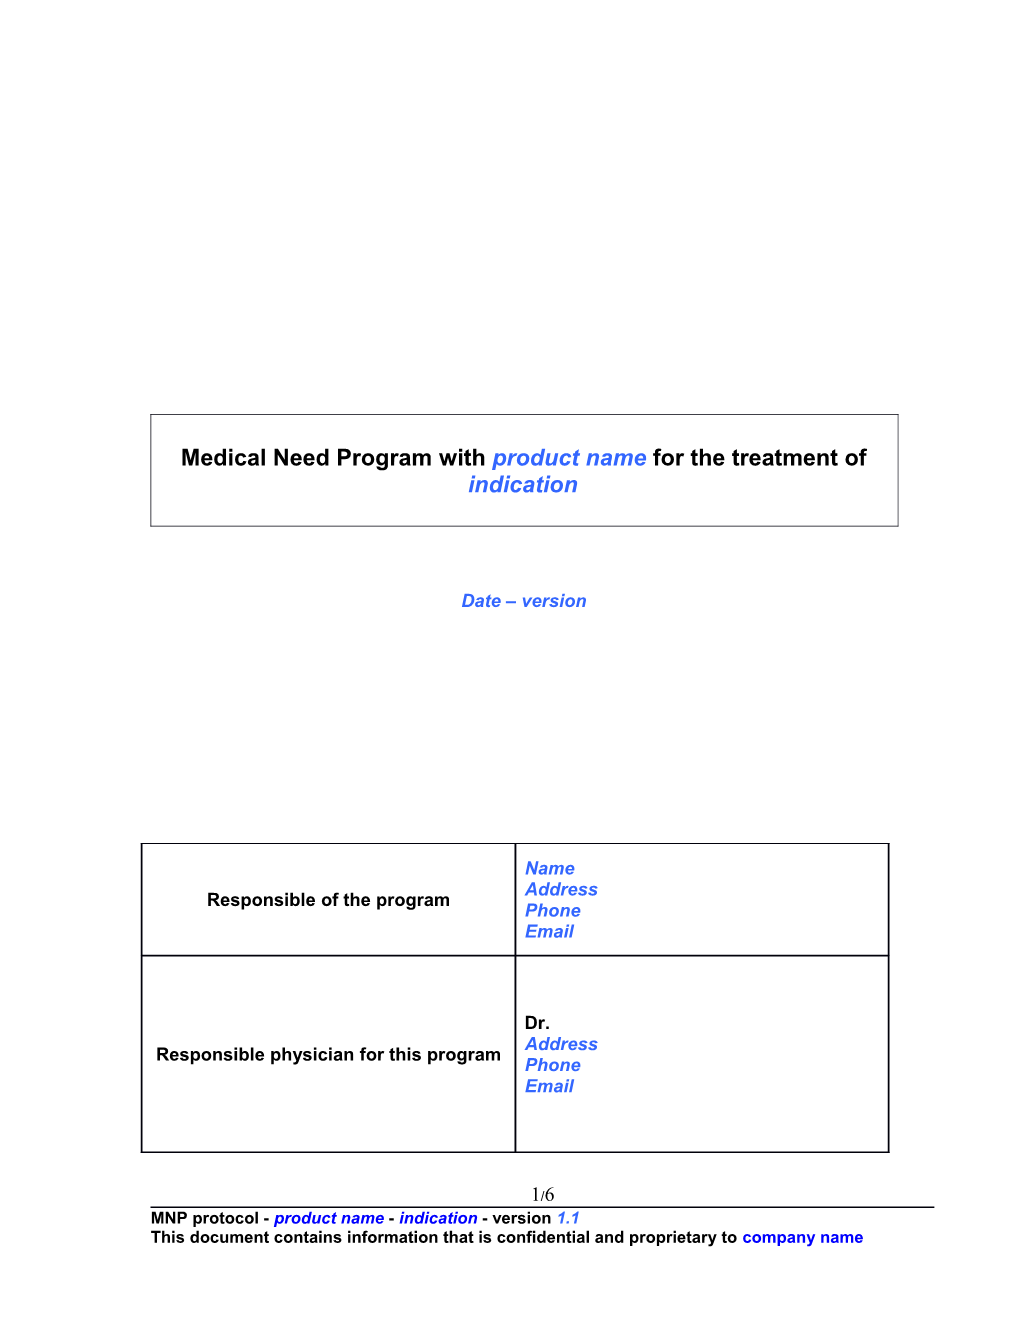 Medical Need Program with Product Name for Individual Patient Supply of Product Name For